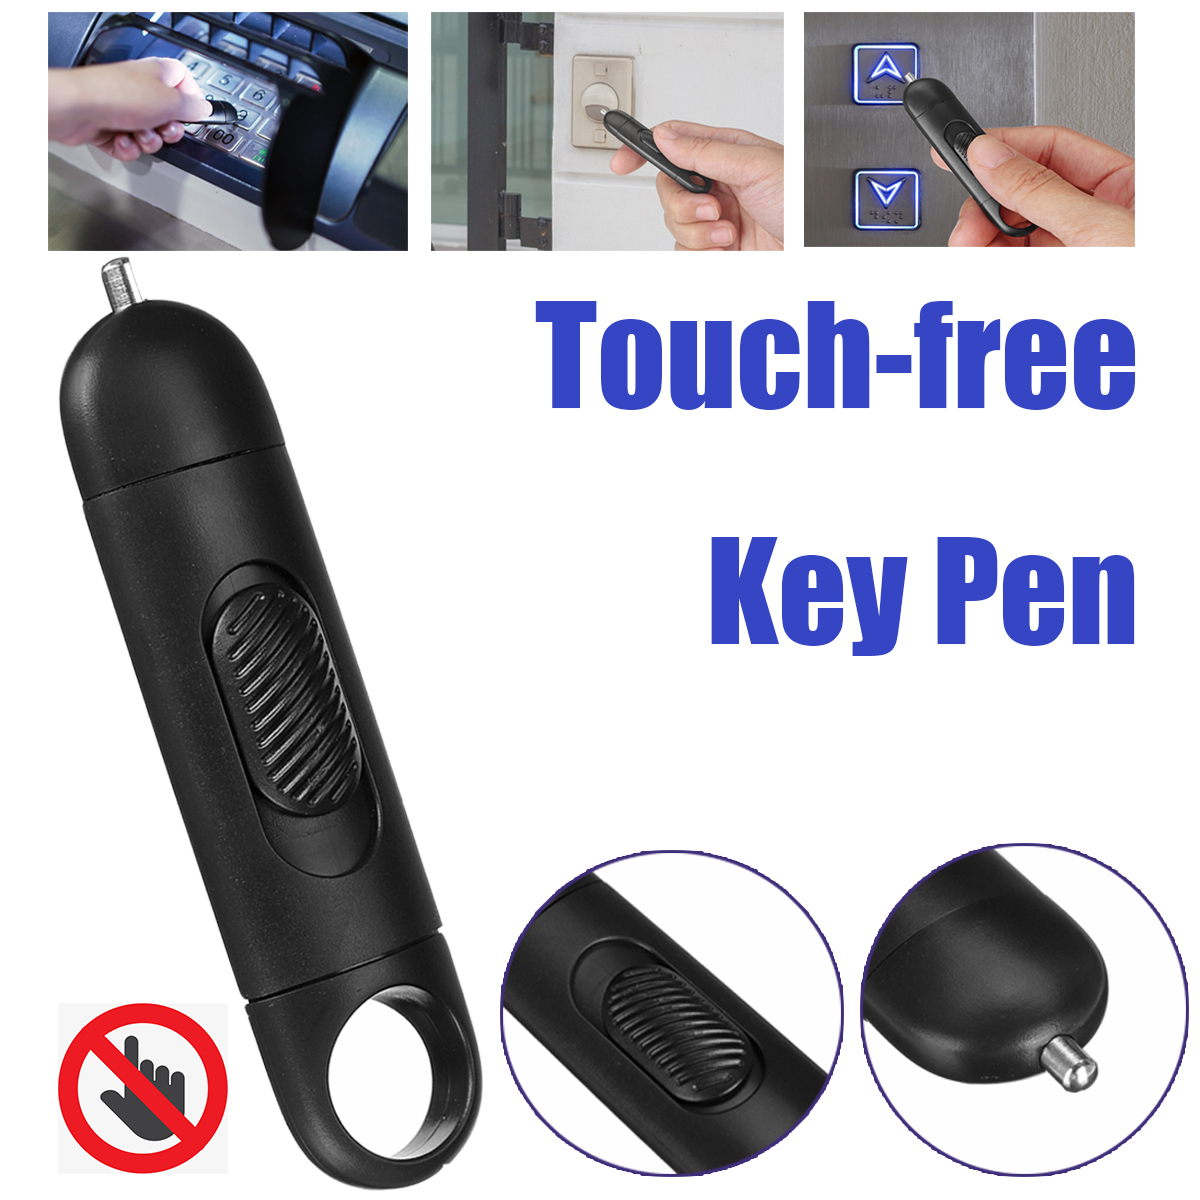 Touch-free-Key-Pen-Elevator-Express-Cabinet-Door-Opener-Bank-ATM-Machine-Withdrawal-Free-Touch-Key-P-1808170-1